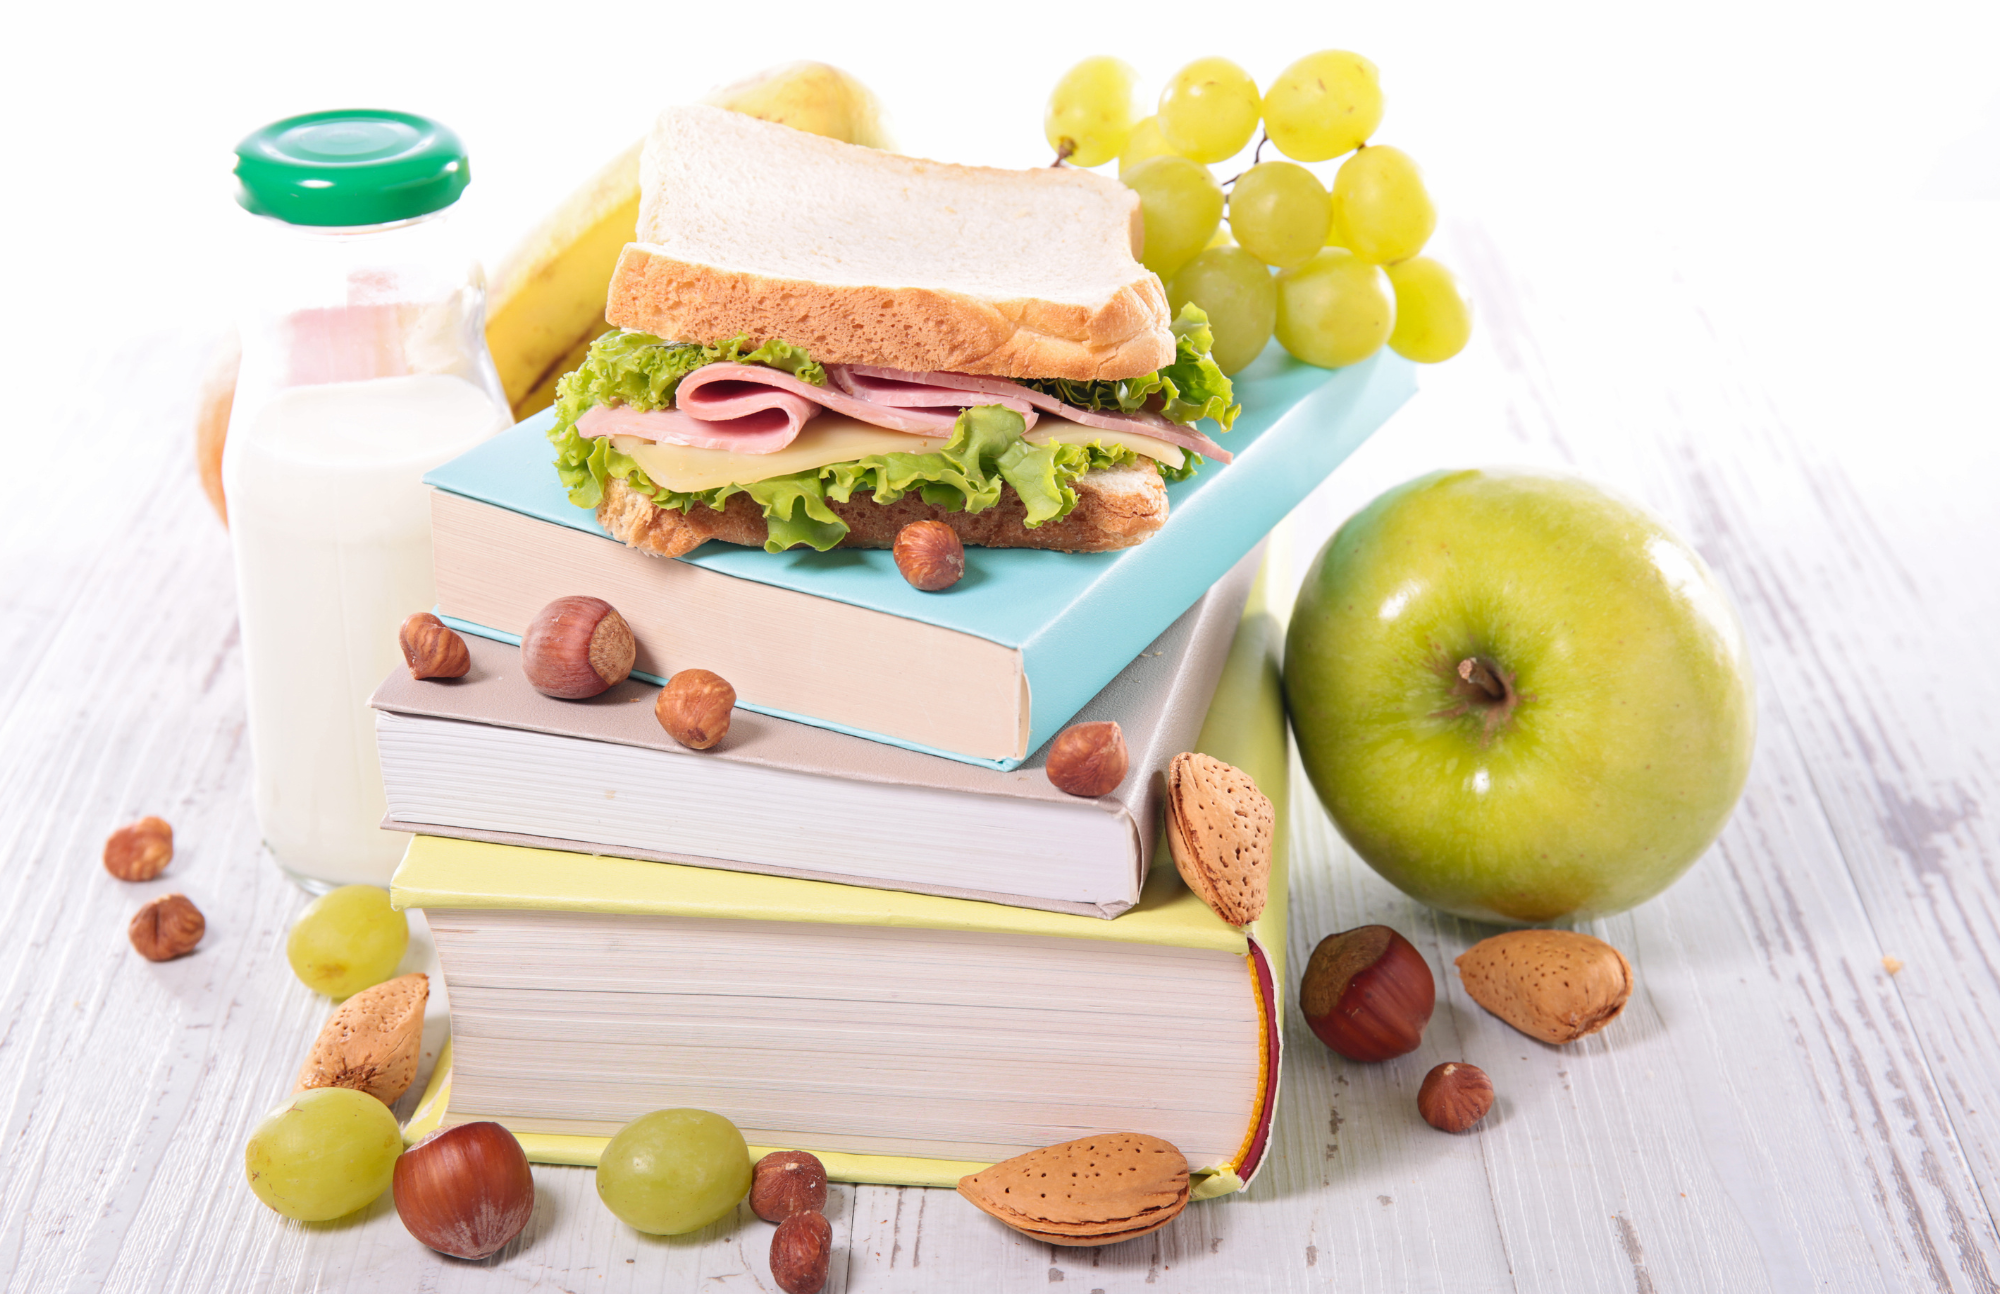 Stack of 3 books with a sandwich on top, apples, grapes, glass of milk, and nuts